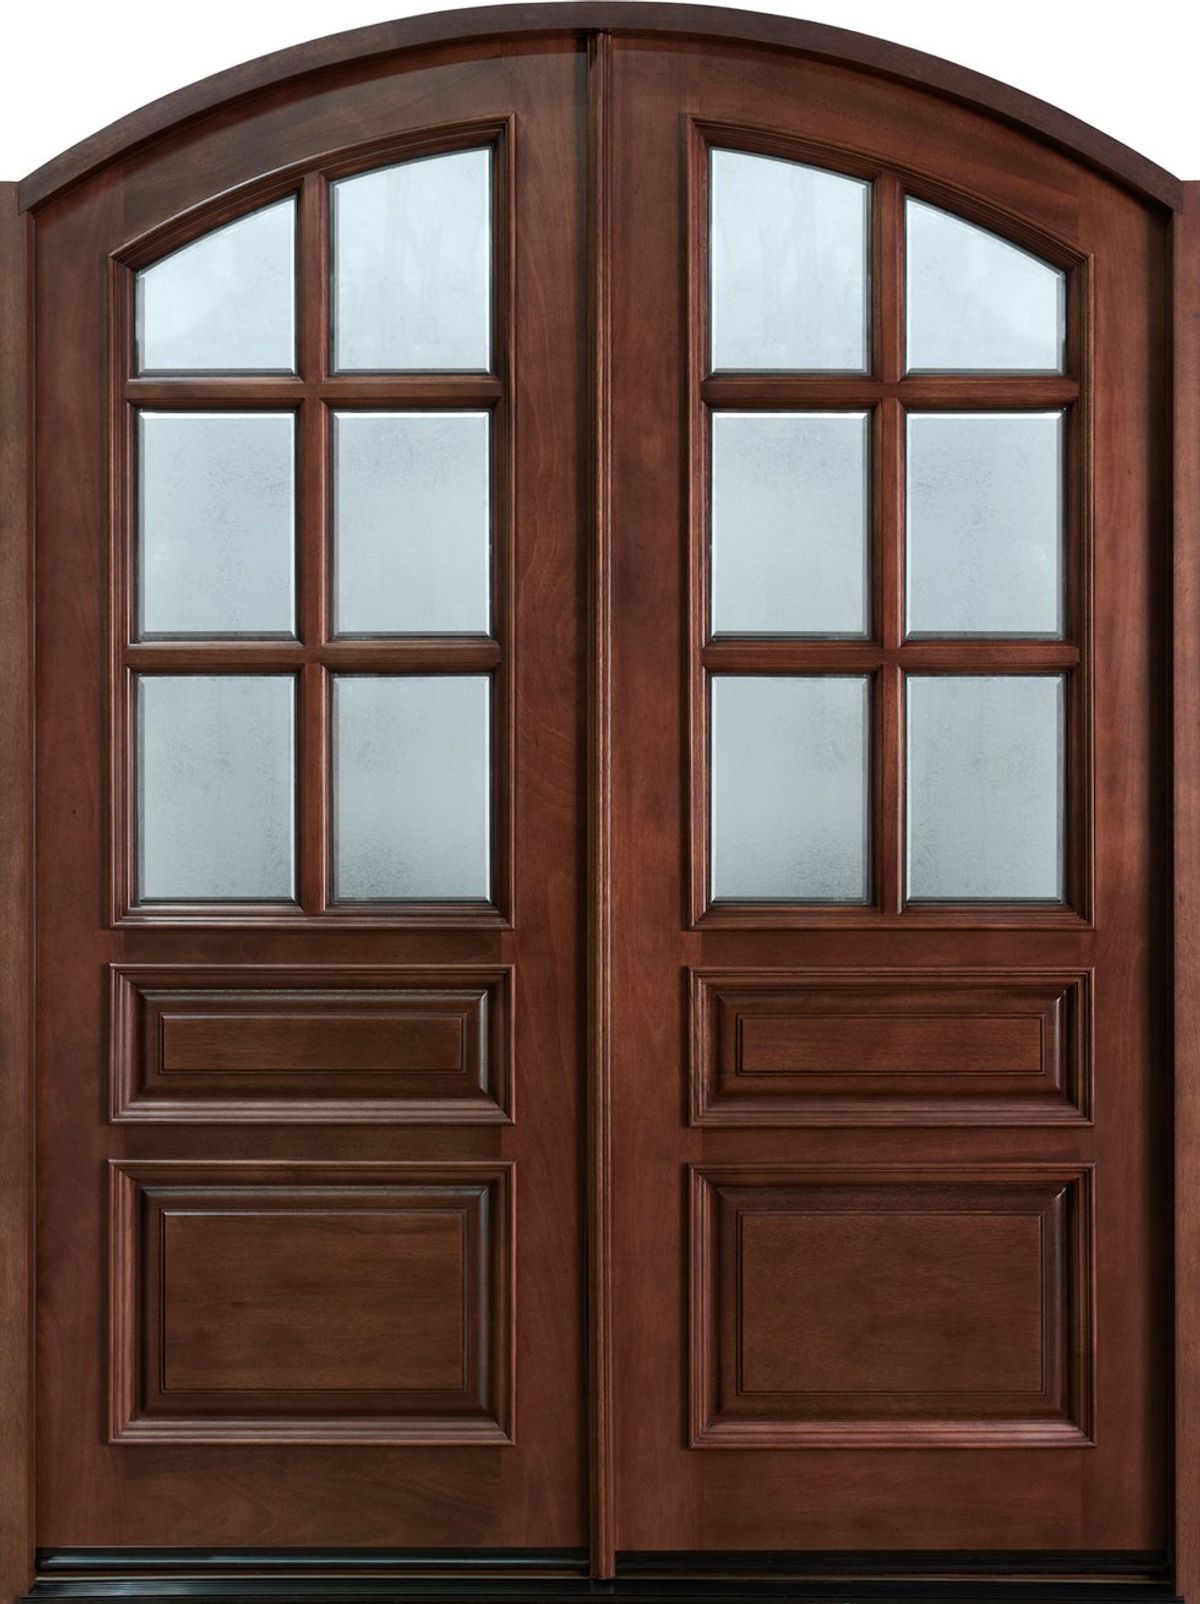 The Definitive Power Ranking of Doors